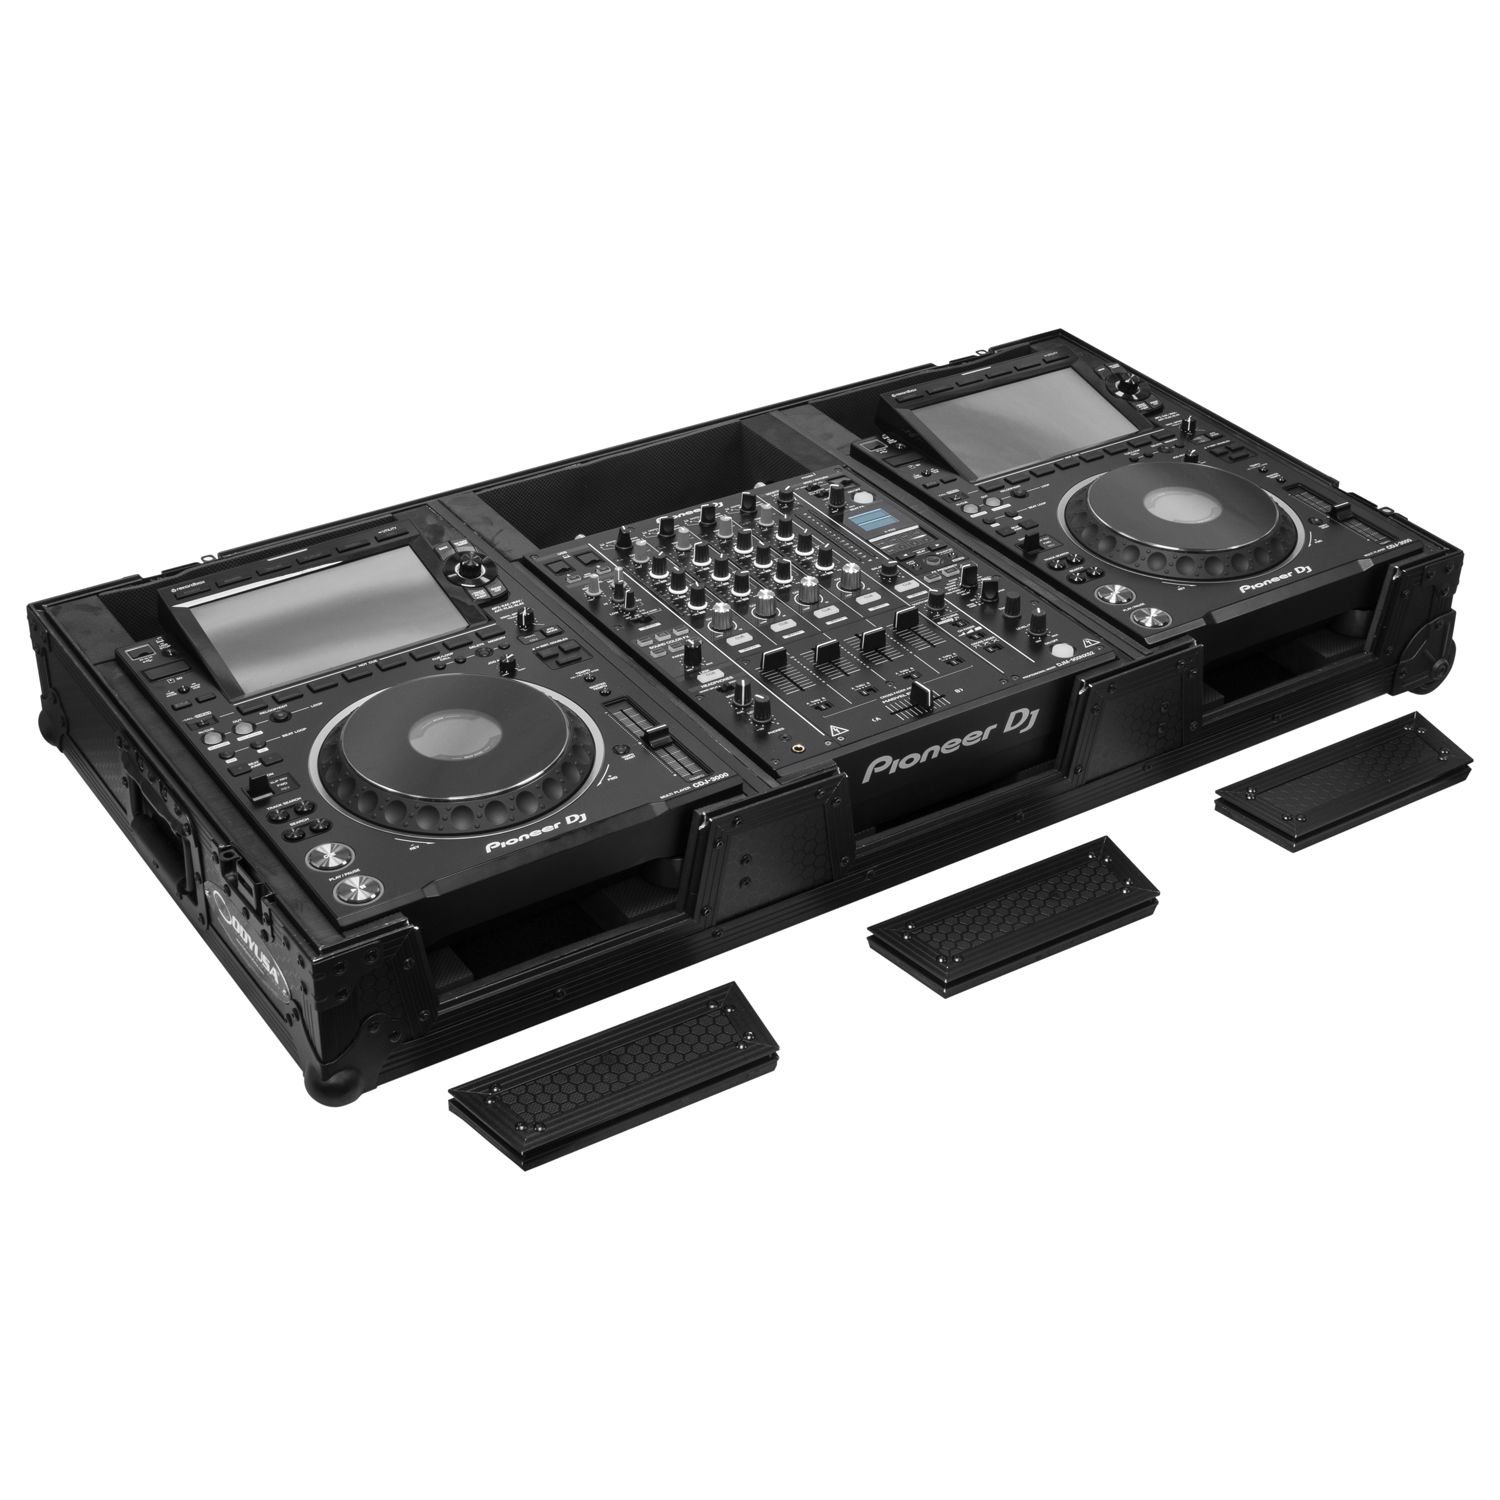 INDUSTRIAL BOARD GLIDE STYLE CASE FITTING MOST 12 DJ MIXERS AND TWO PIONEER CDJ-3000 